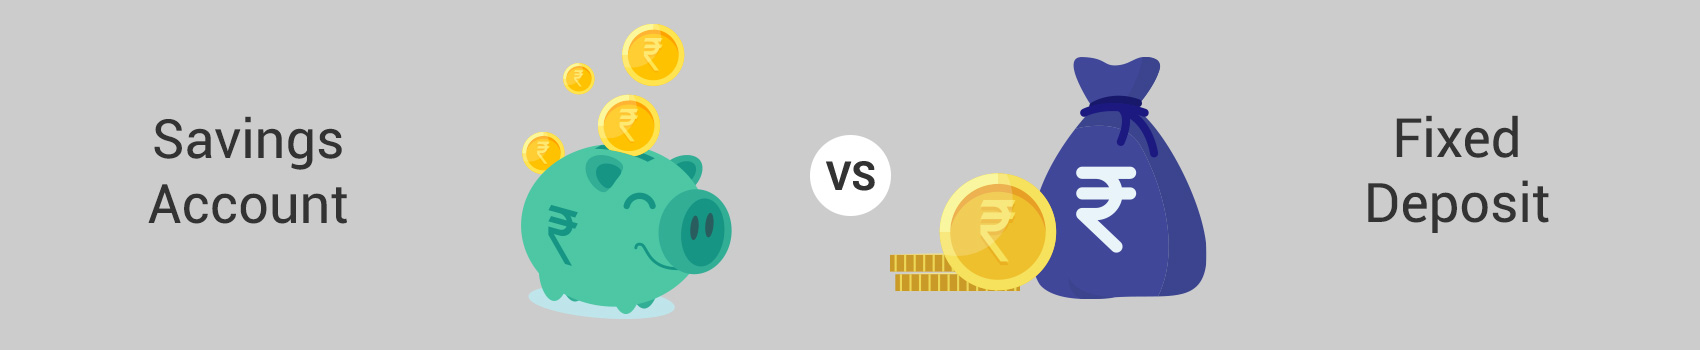 Difference between Savings Account and Fixed Deposit Account